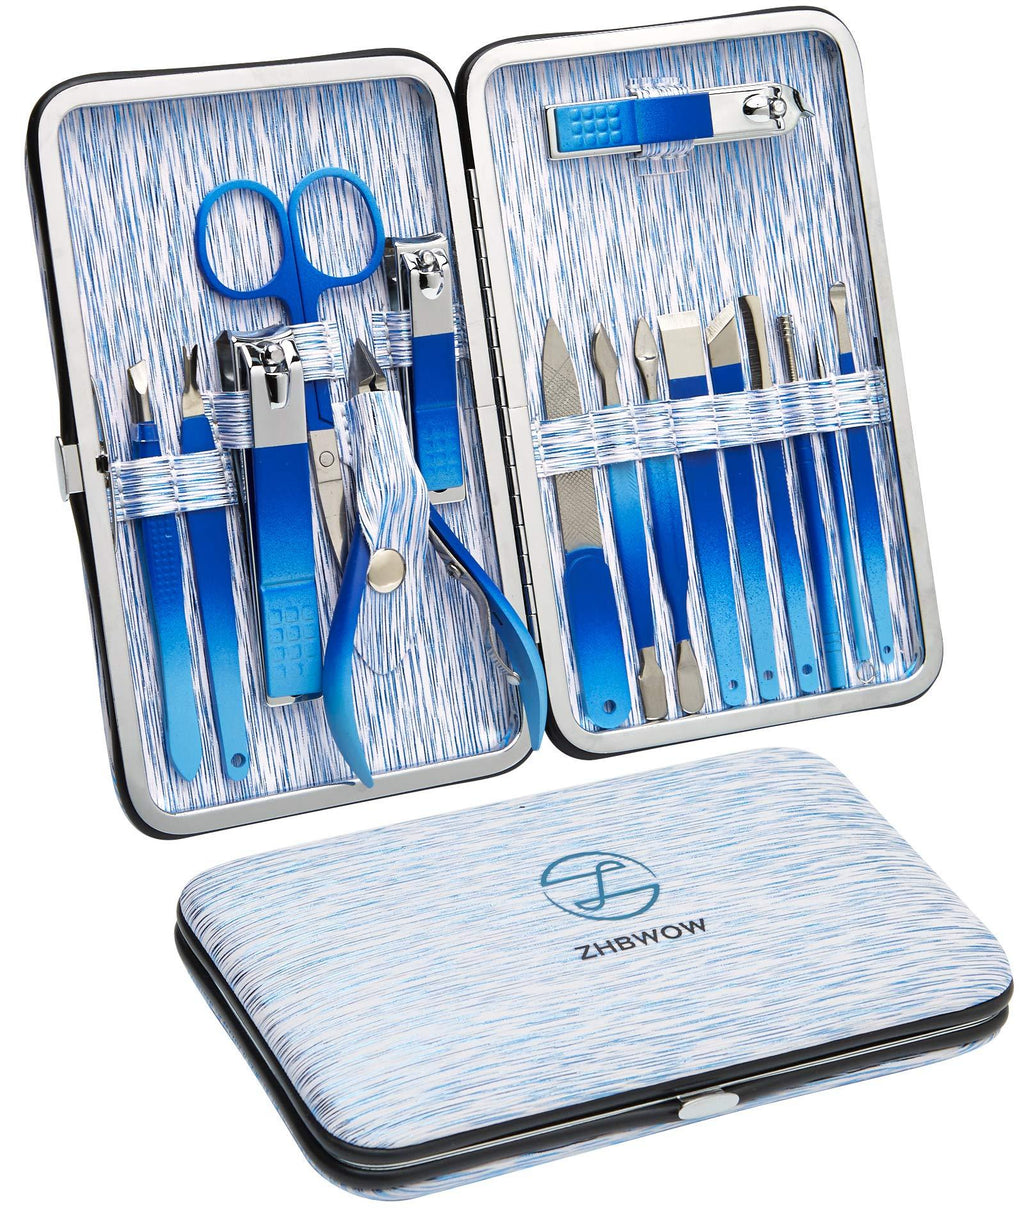 Manicure Set,pedicure Kit,Nail Clippers, Professional Grooming Kit, Nail File Tools 16 in 1 with Blue Travel Case Tools For Men and Women 2021 Upgraded Christmas Gift - BeesActive Australia